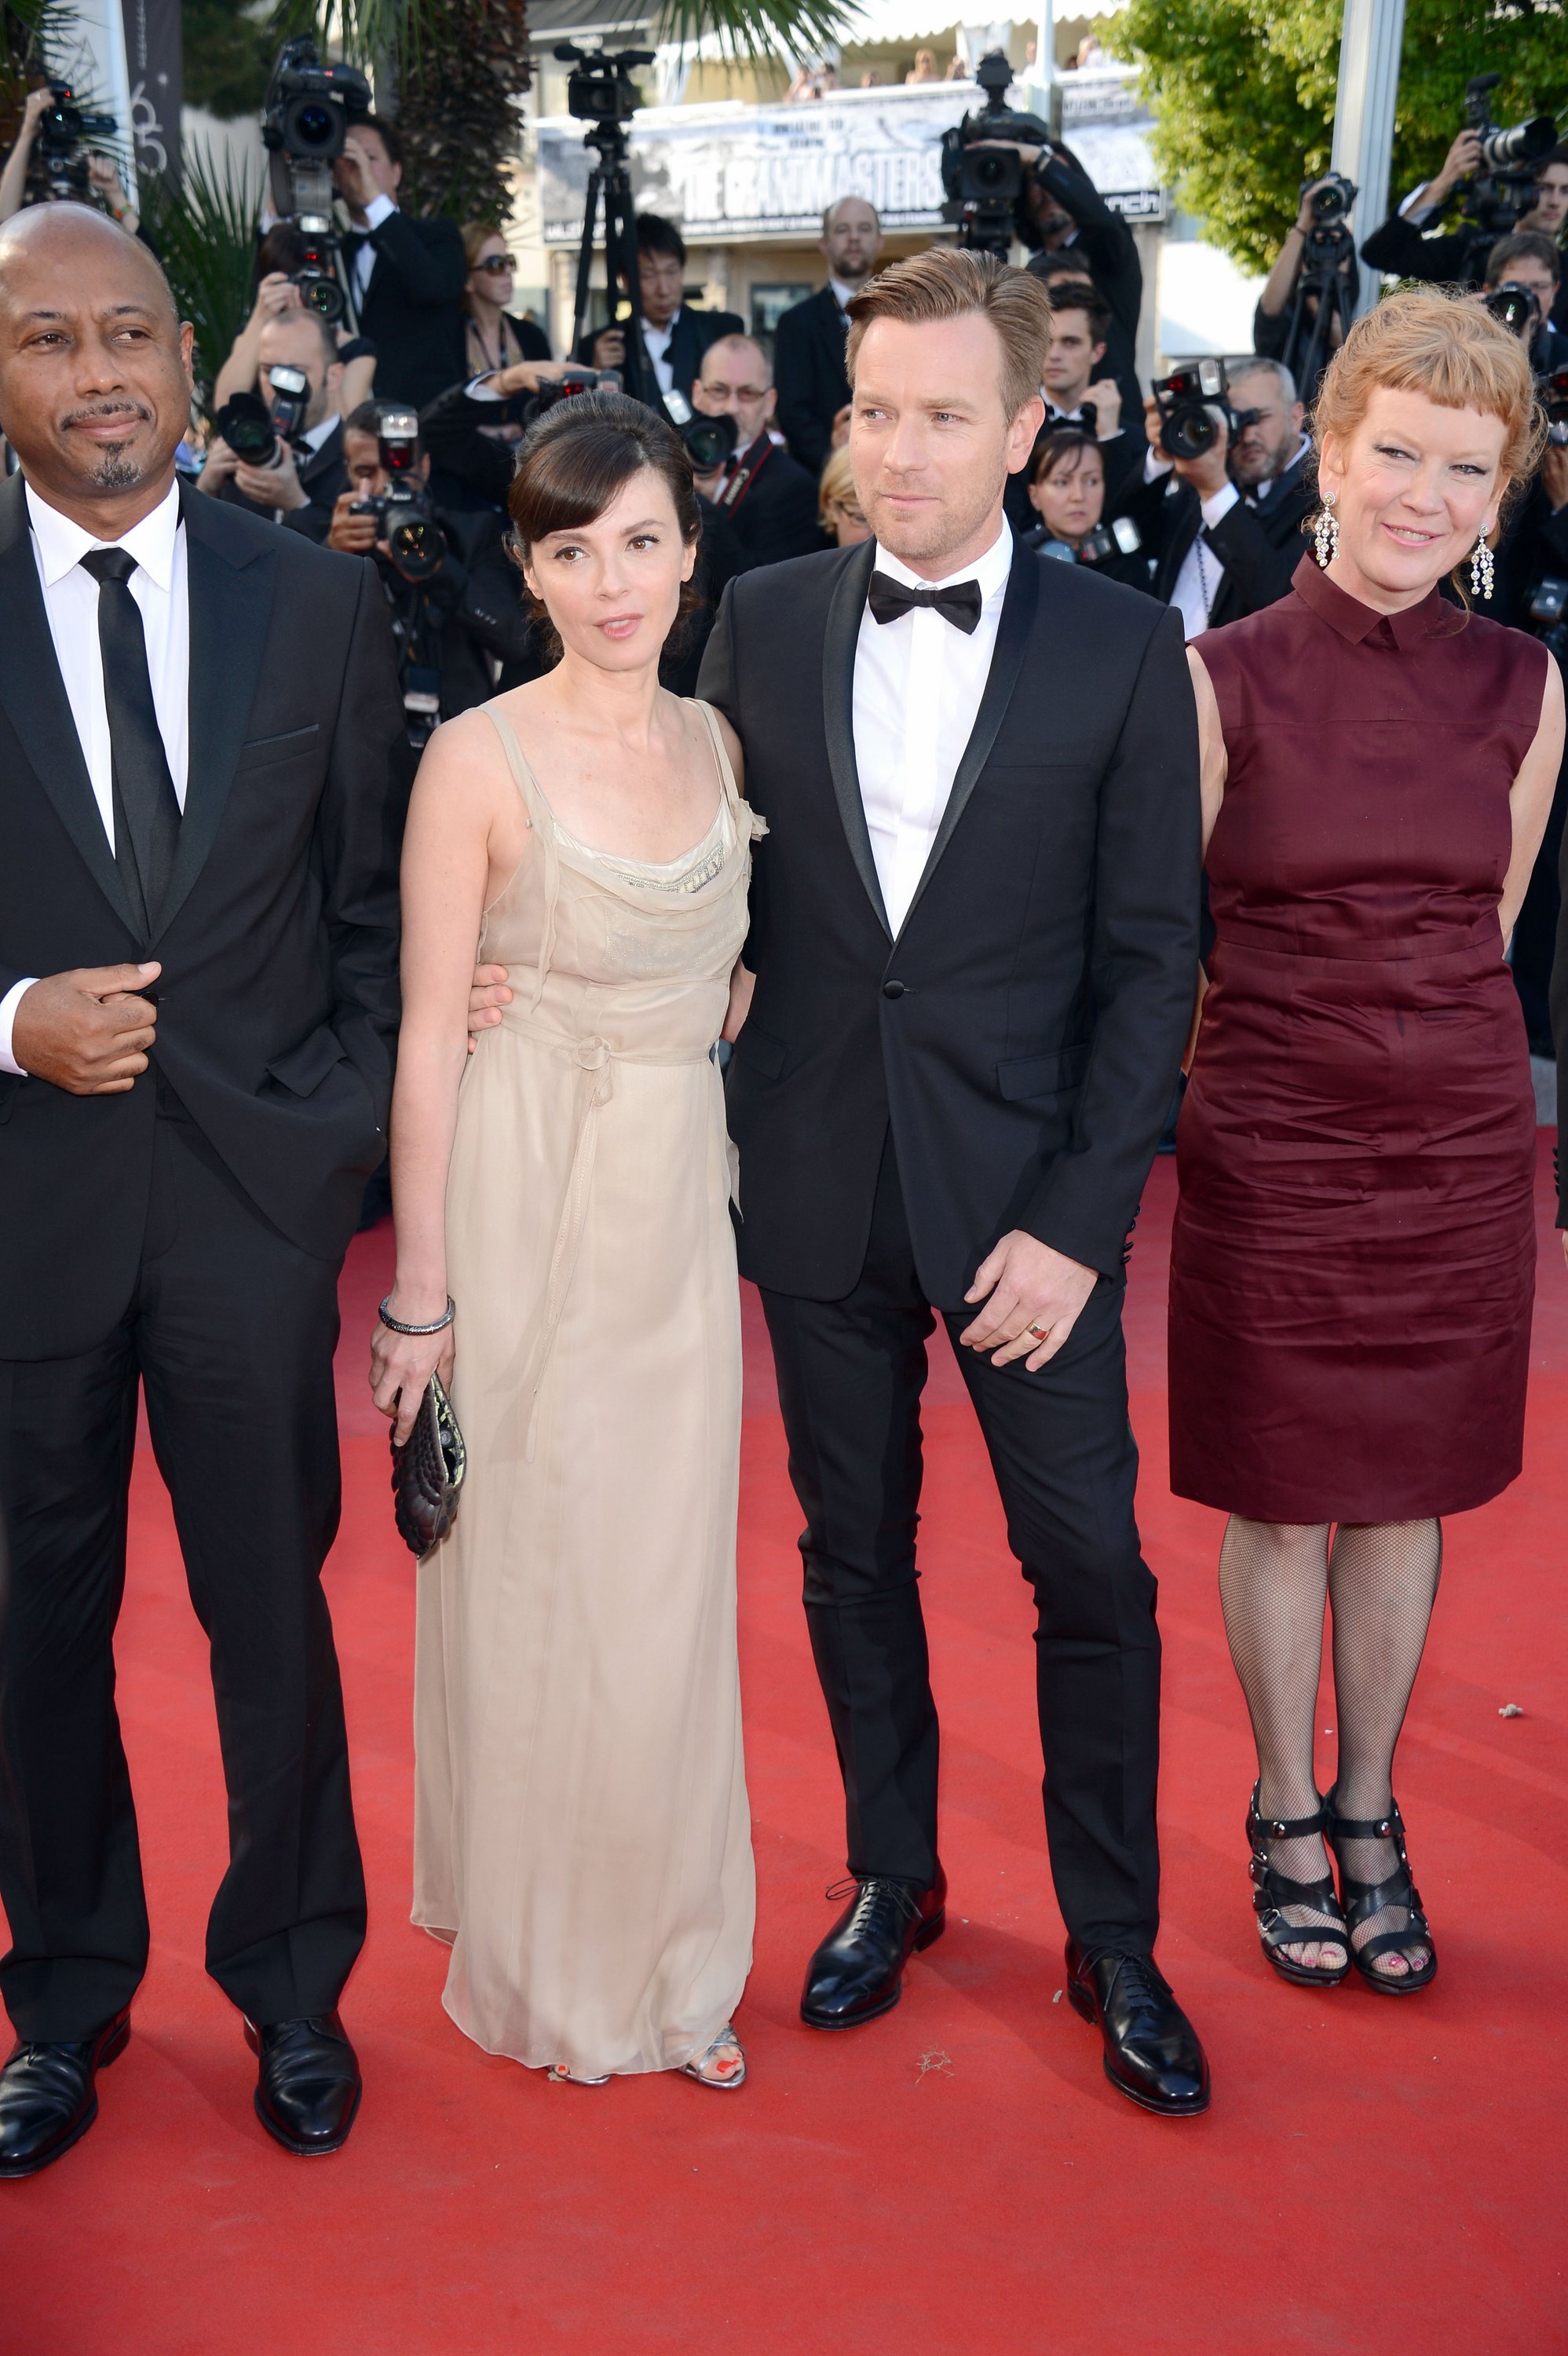 2012-05-23-Cannes-Film-Festival-On-The-Road-Premiere-017.jpg